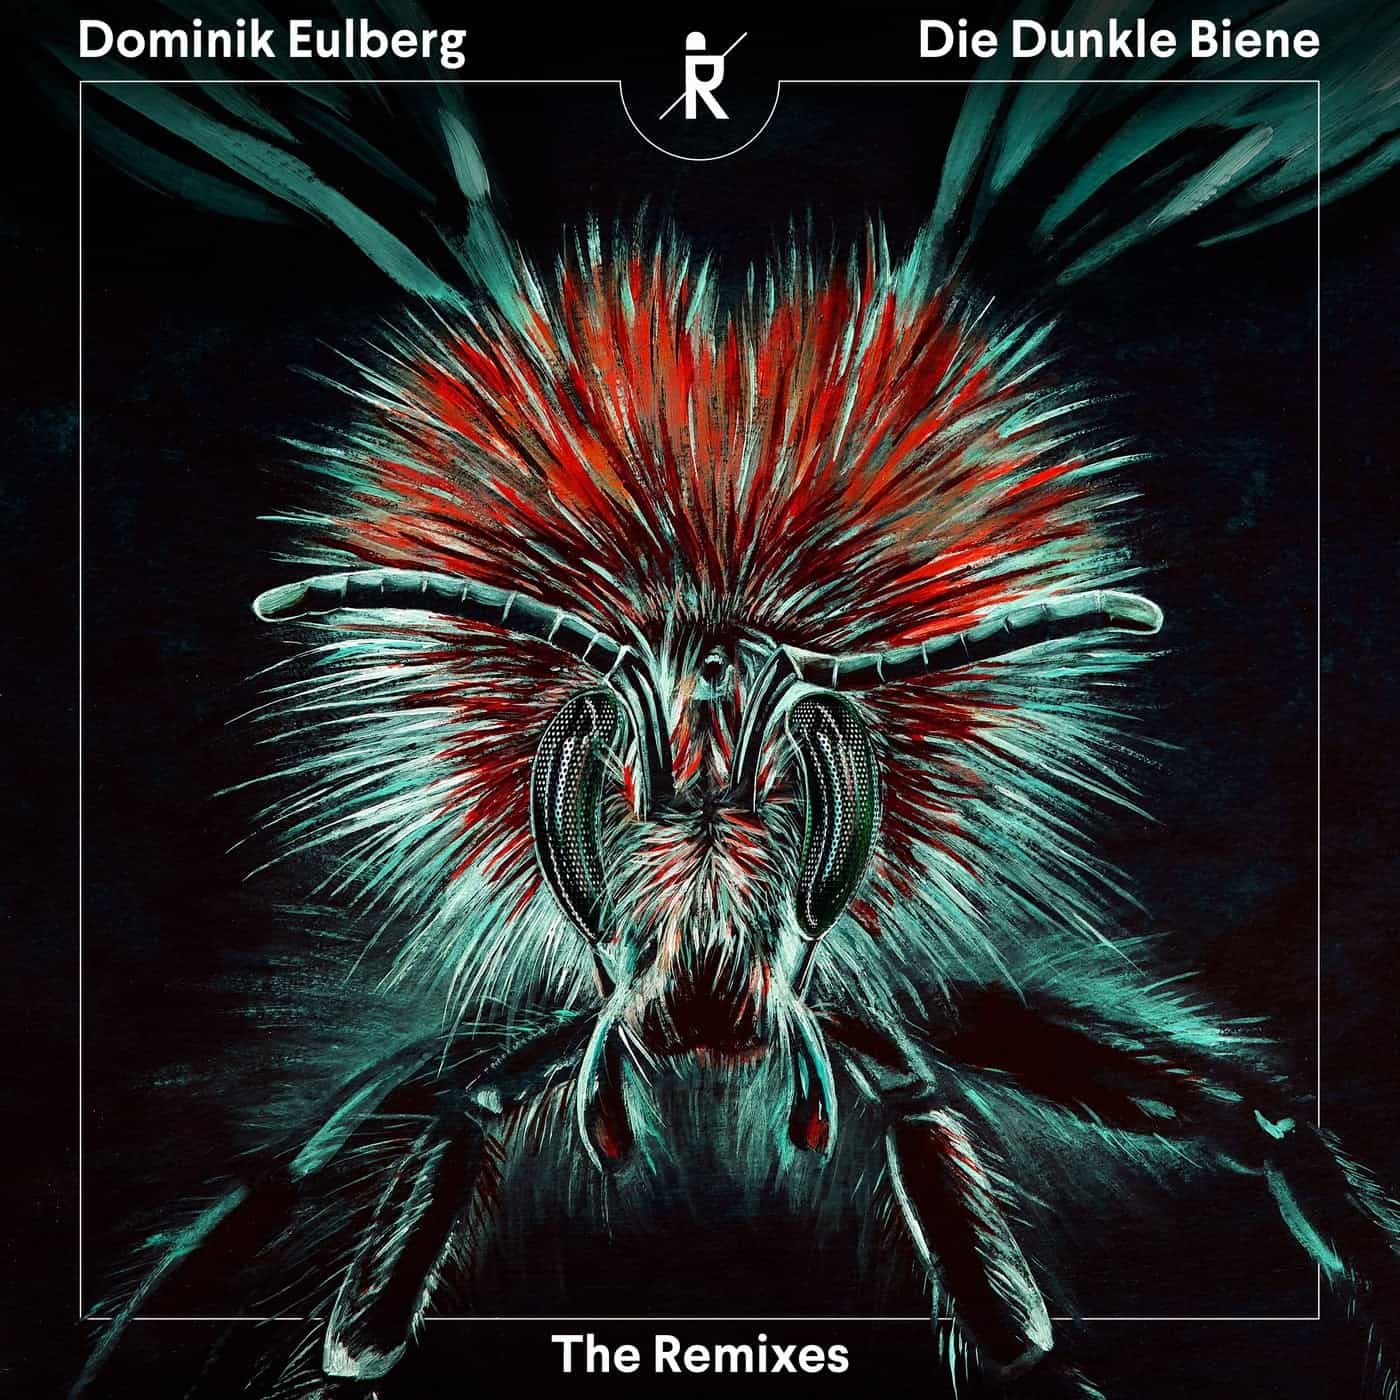 image cover: Dominik Eulberg - Die Dunkle Biene (The Remixes) on Ritter Butzke Records